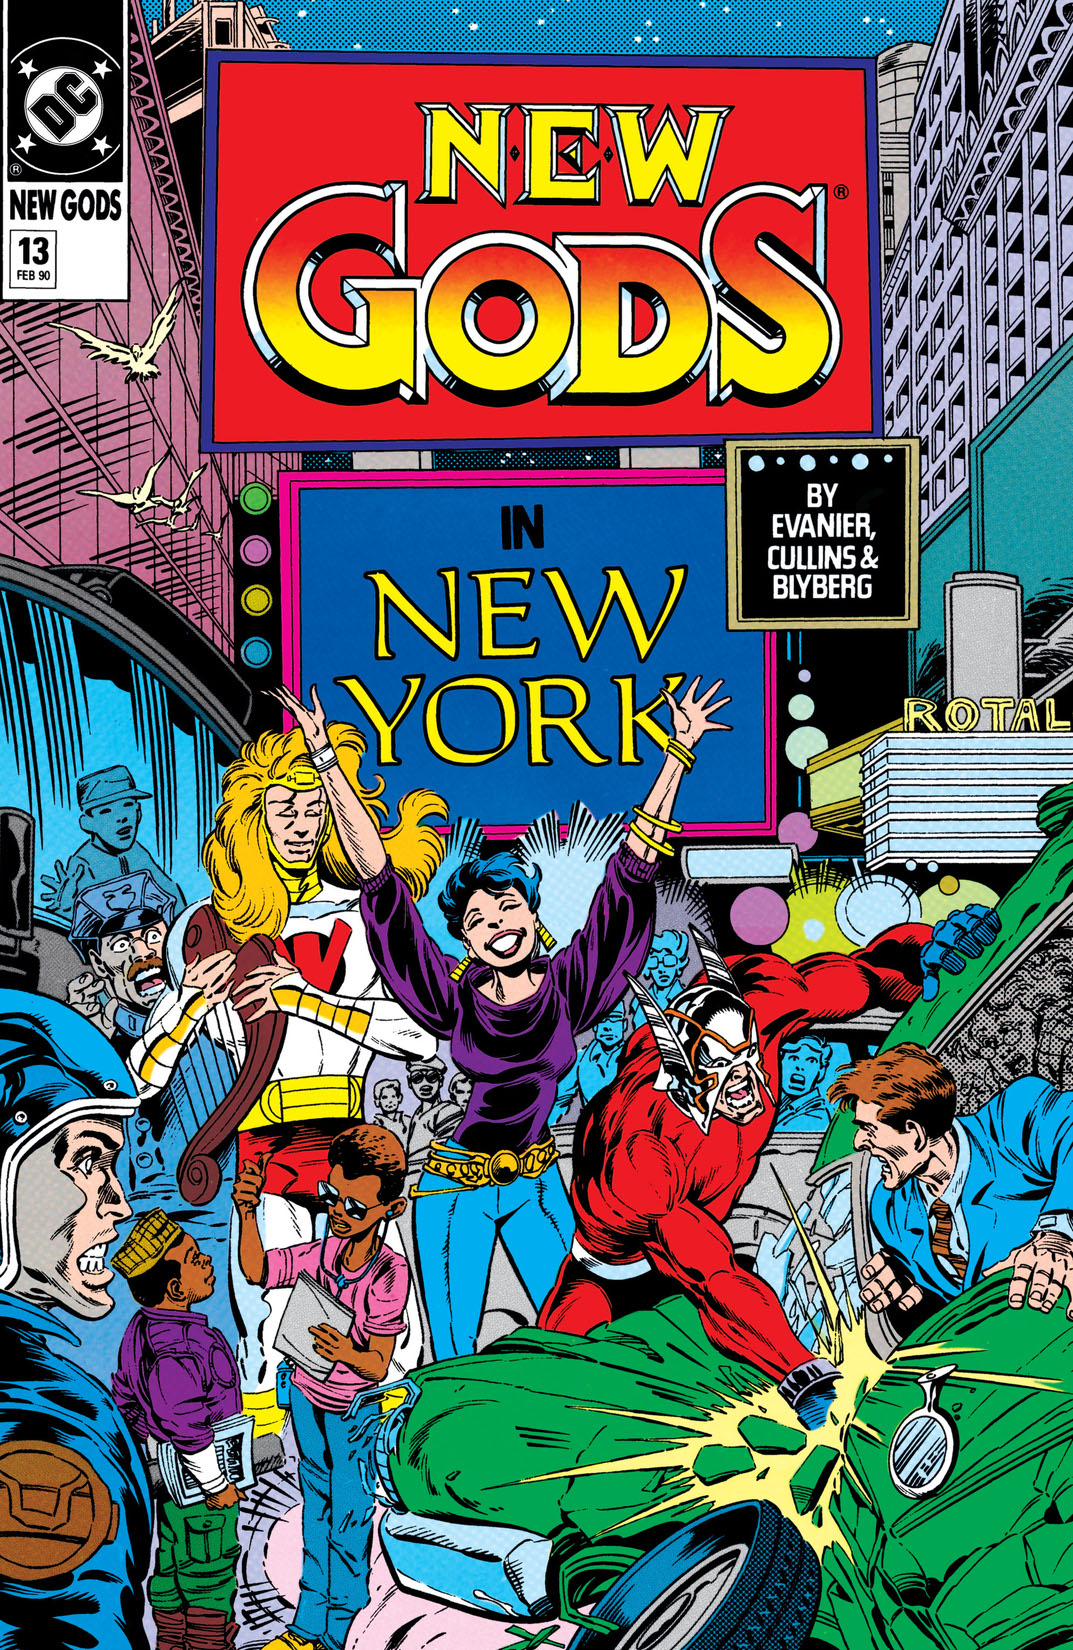 New Gods (1989-) #13 preview images